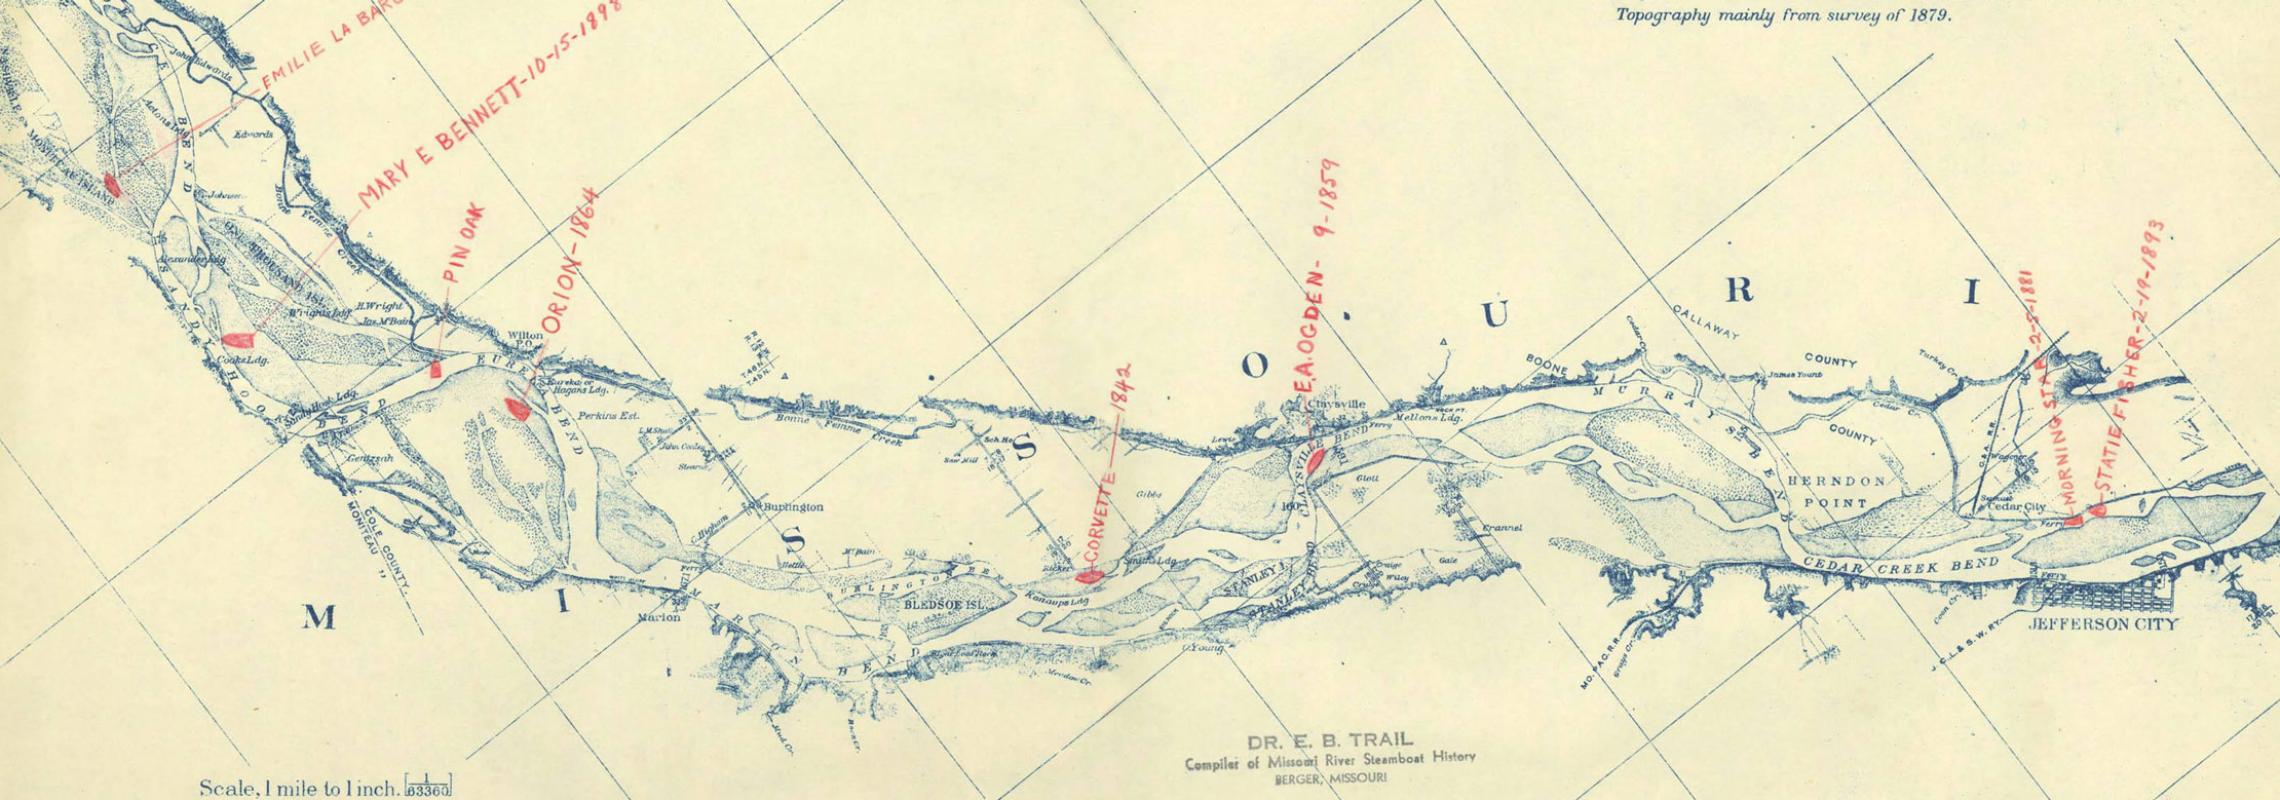 Map depicting Missouri River immediately west of Jefferson City Missouri with notations of riverboat wreck locations.